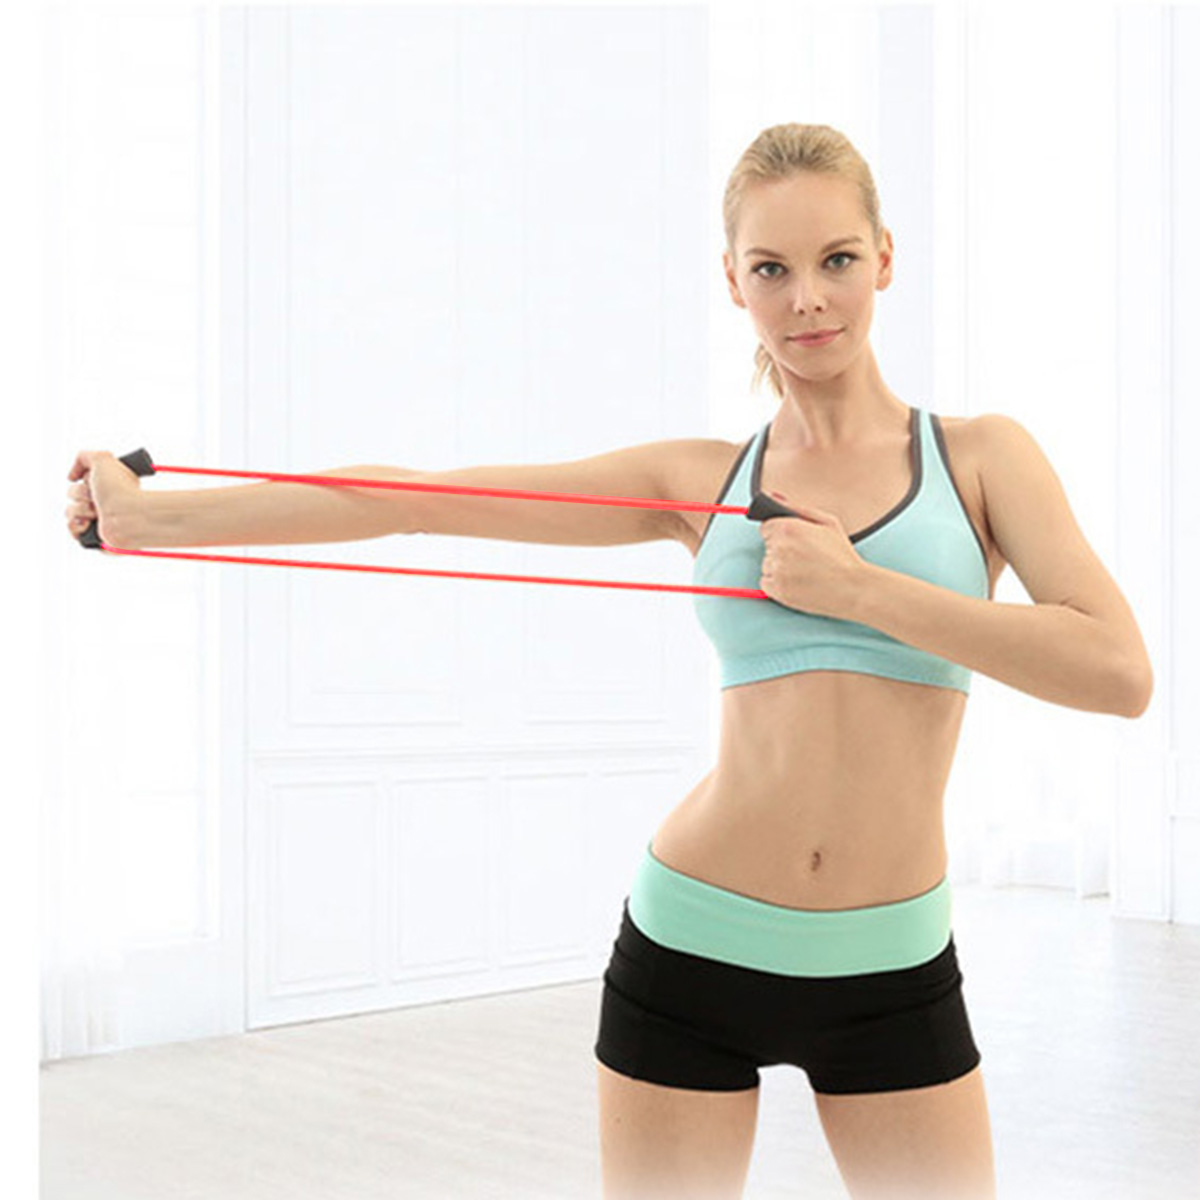 152030lb-Fitness-Resistance-Bands-Gym-Yoga-Pull-Rope-Gym-Exercise-Training-Workout-Tools-1684050-5